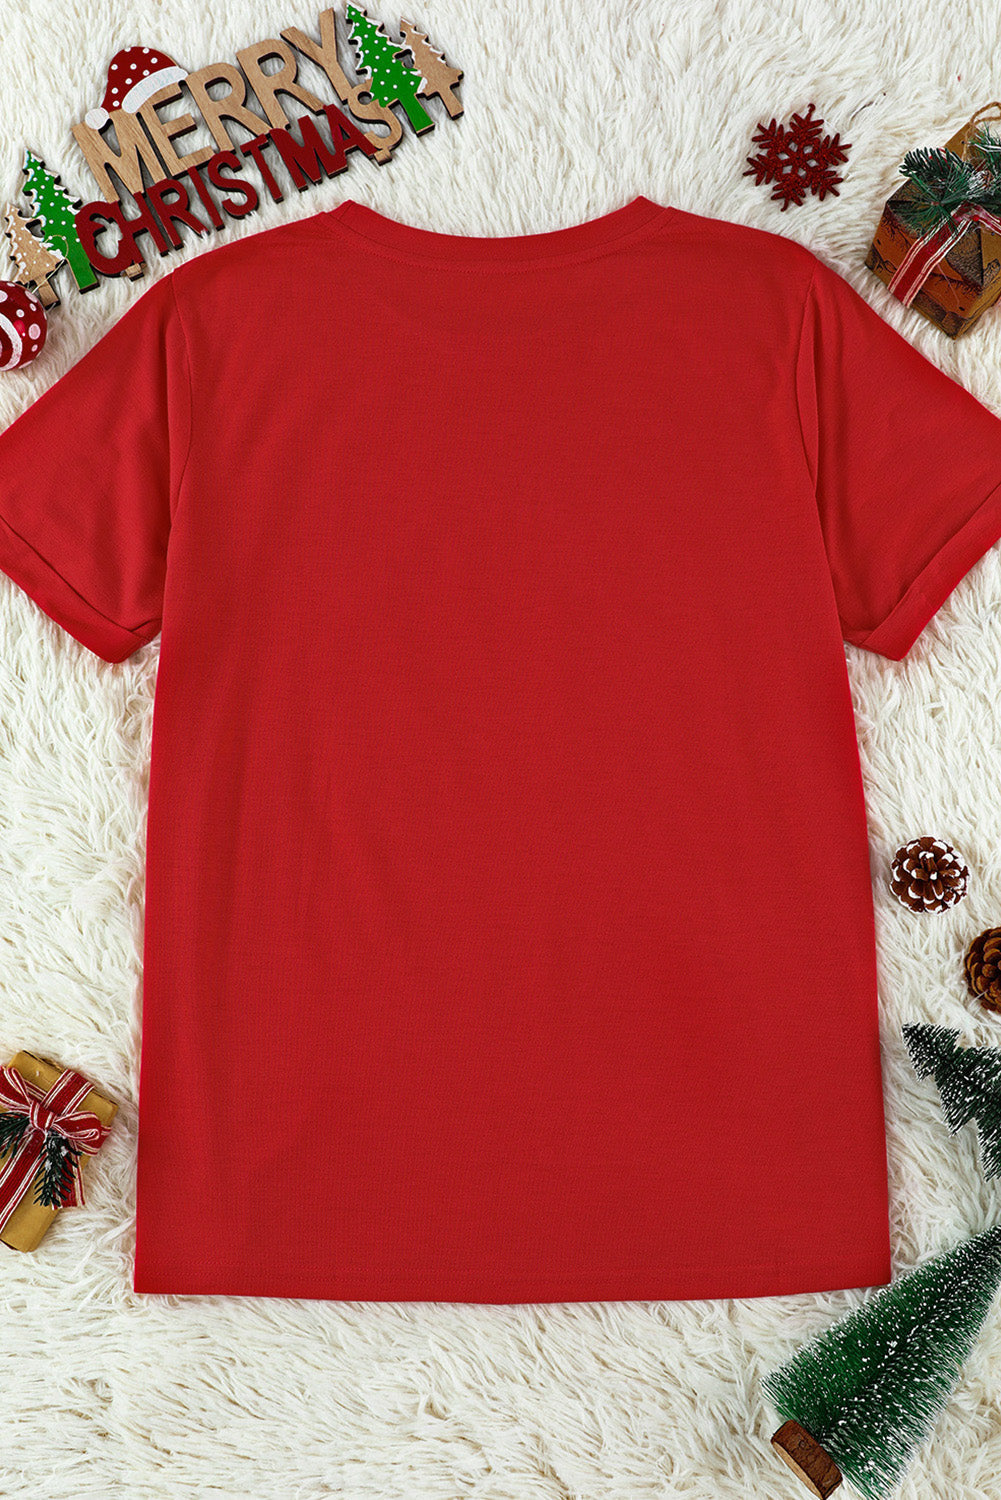 Holiday Graphic Tee